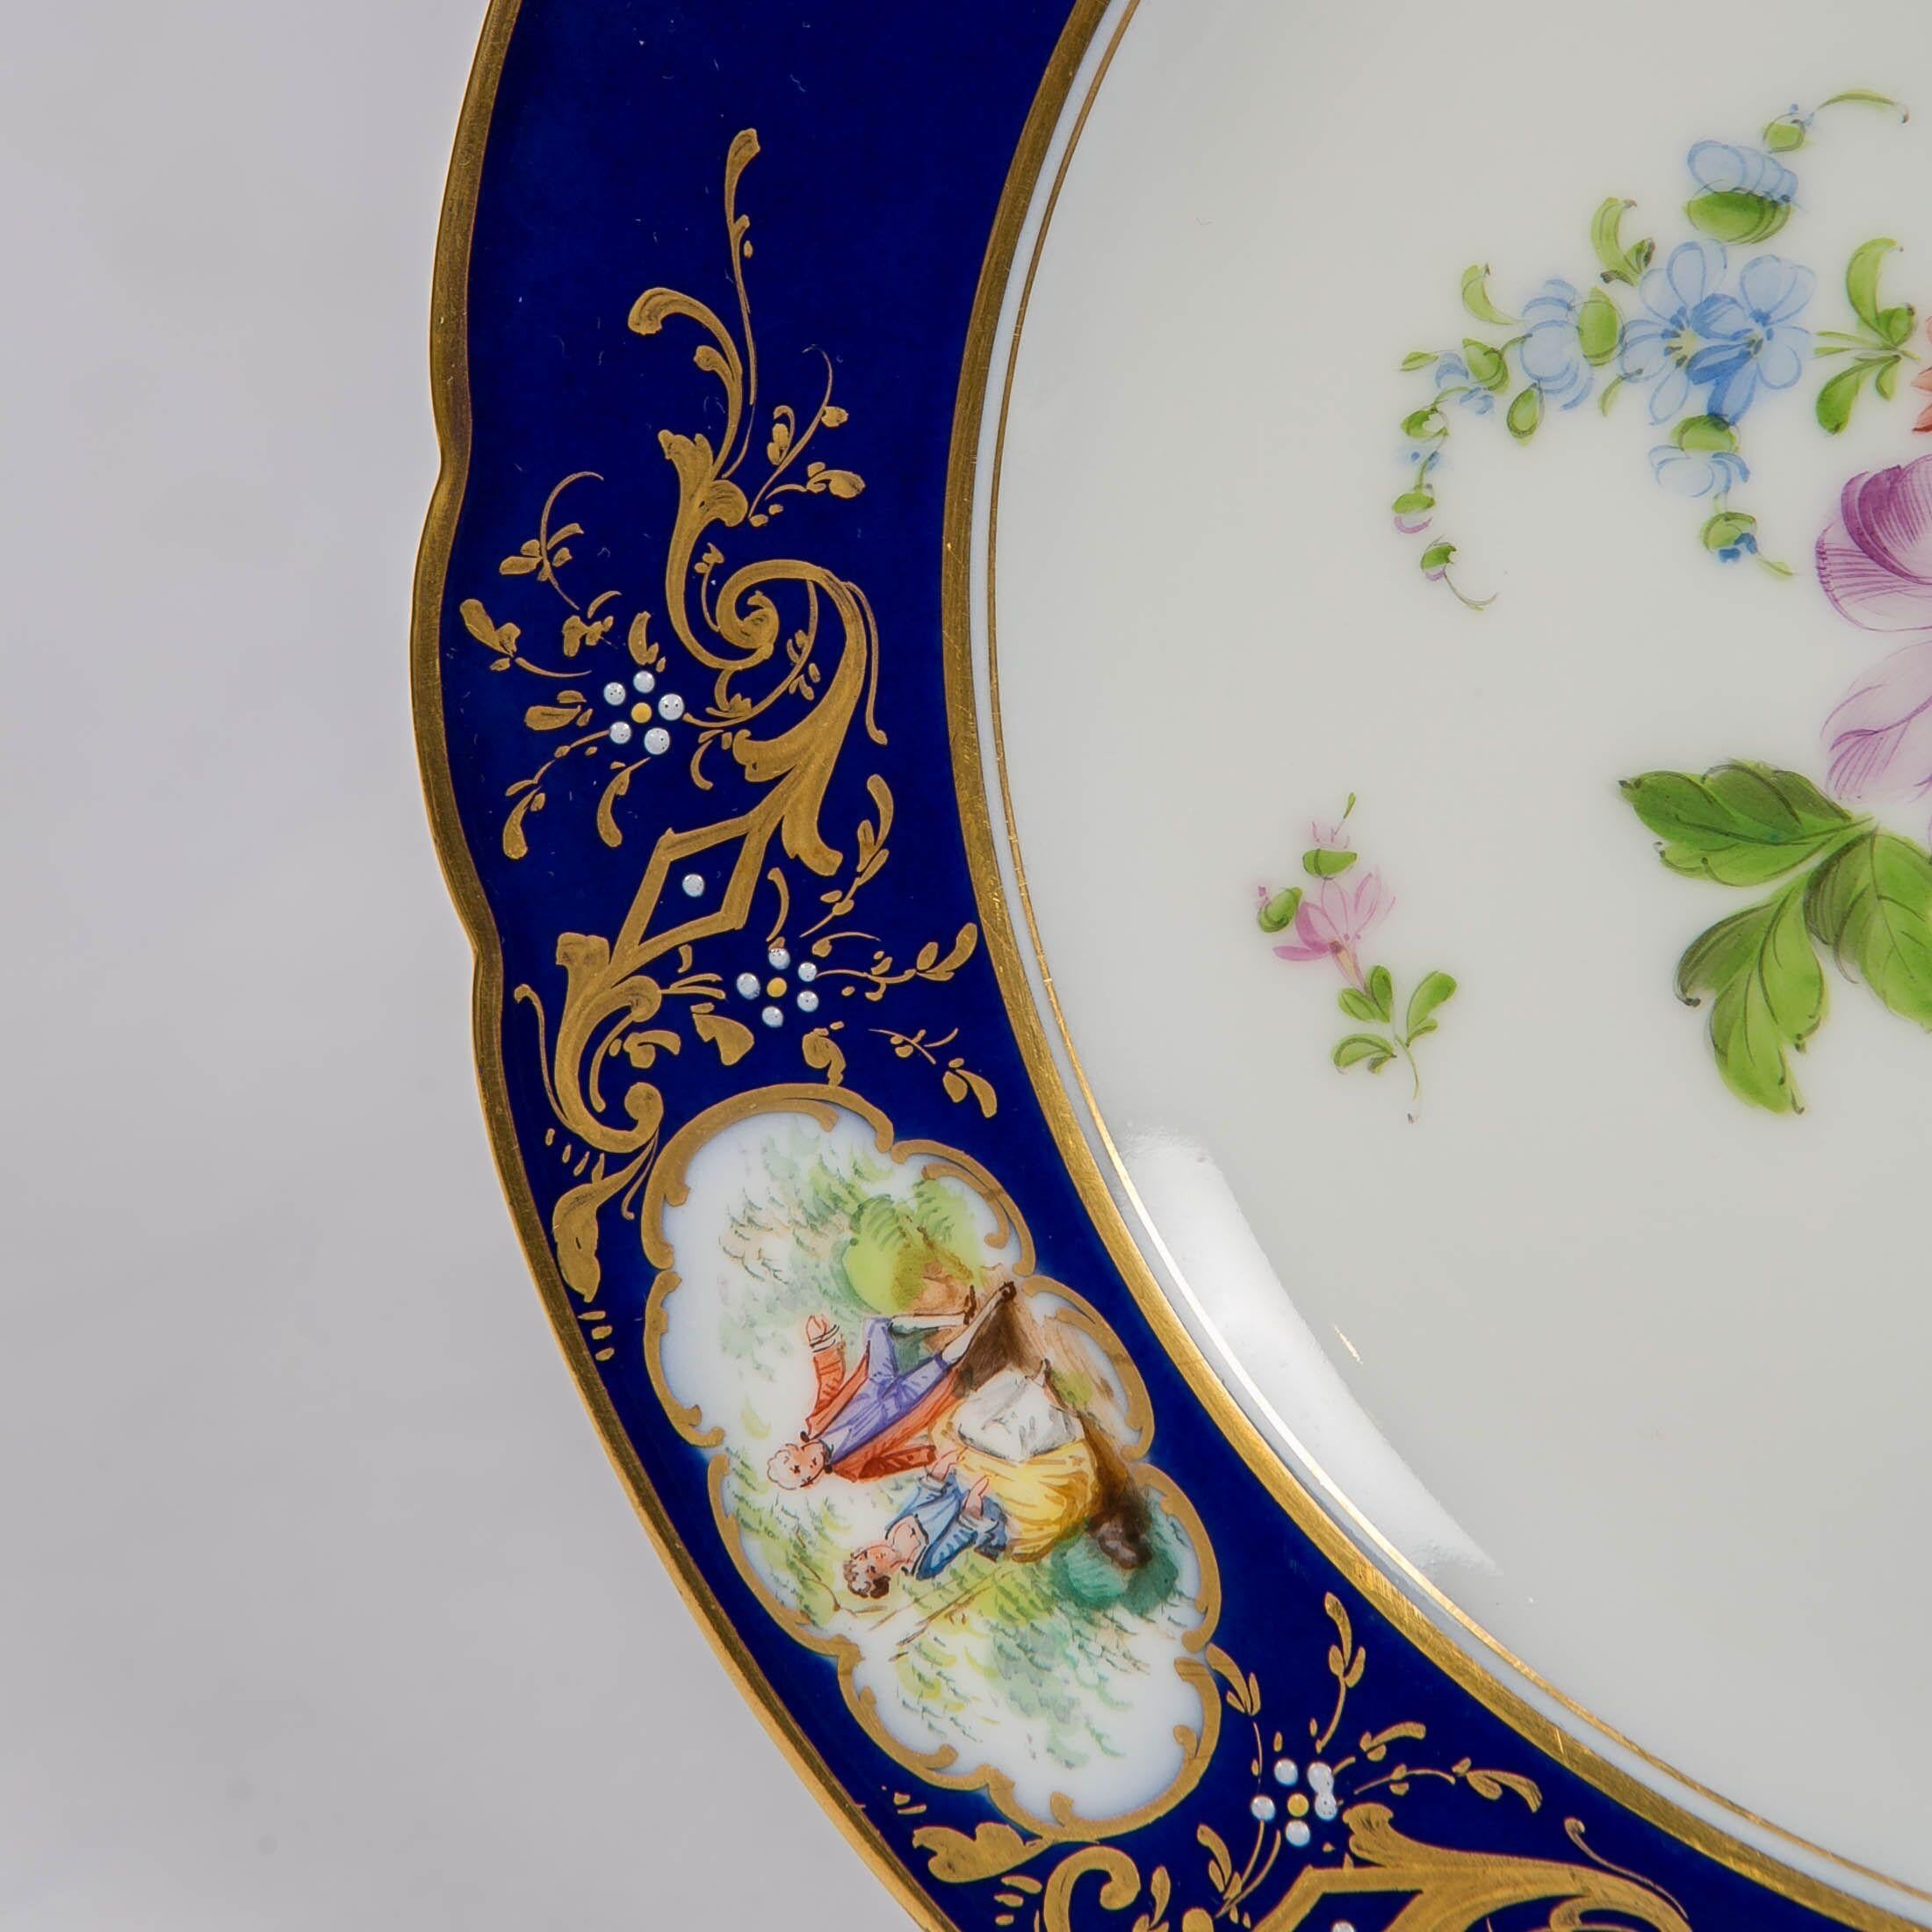 Rococo Revival Dozen Dresden China Dinner Dishes with Flowers and Deep Blue Borders